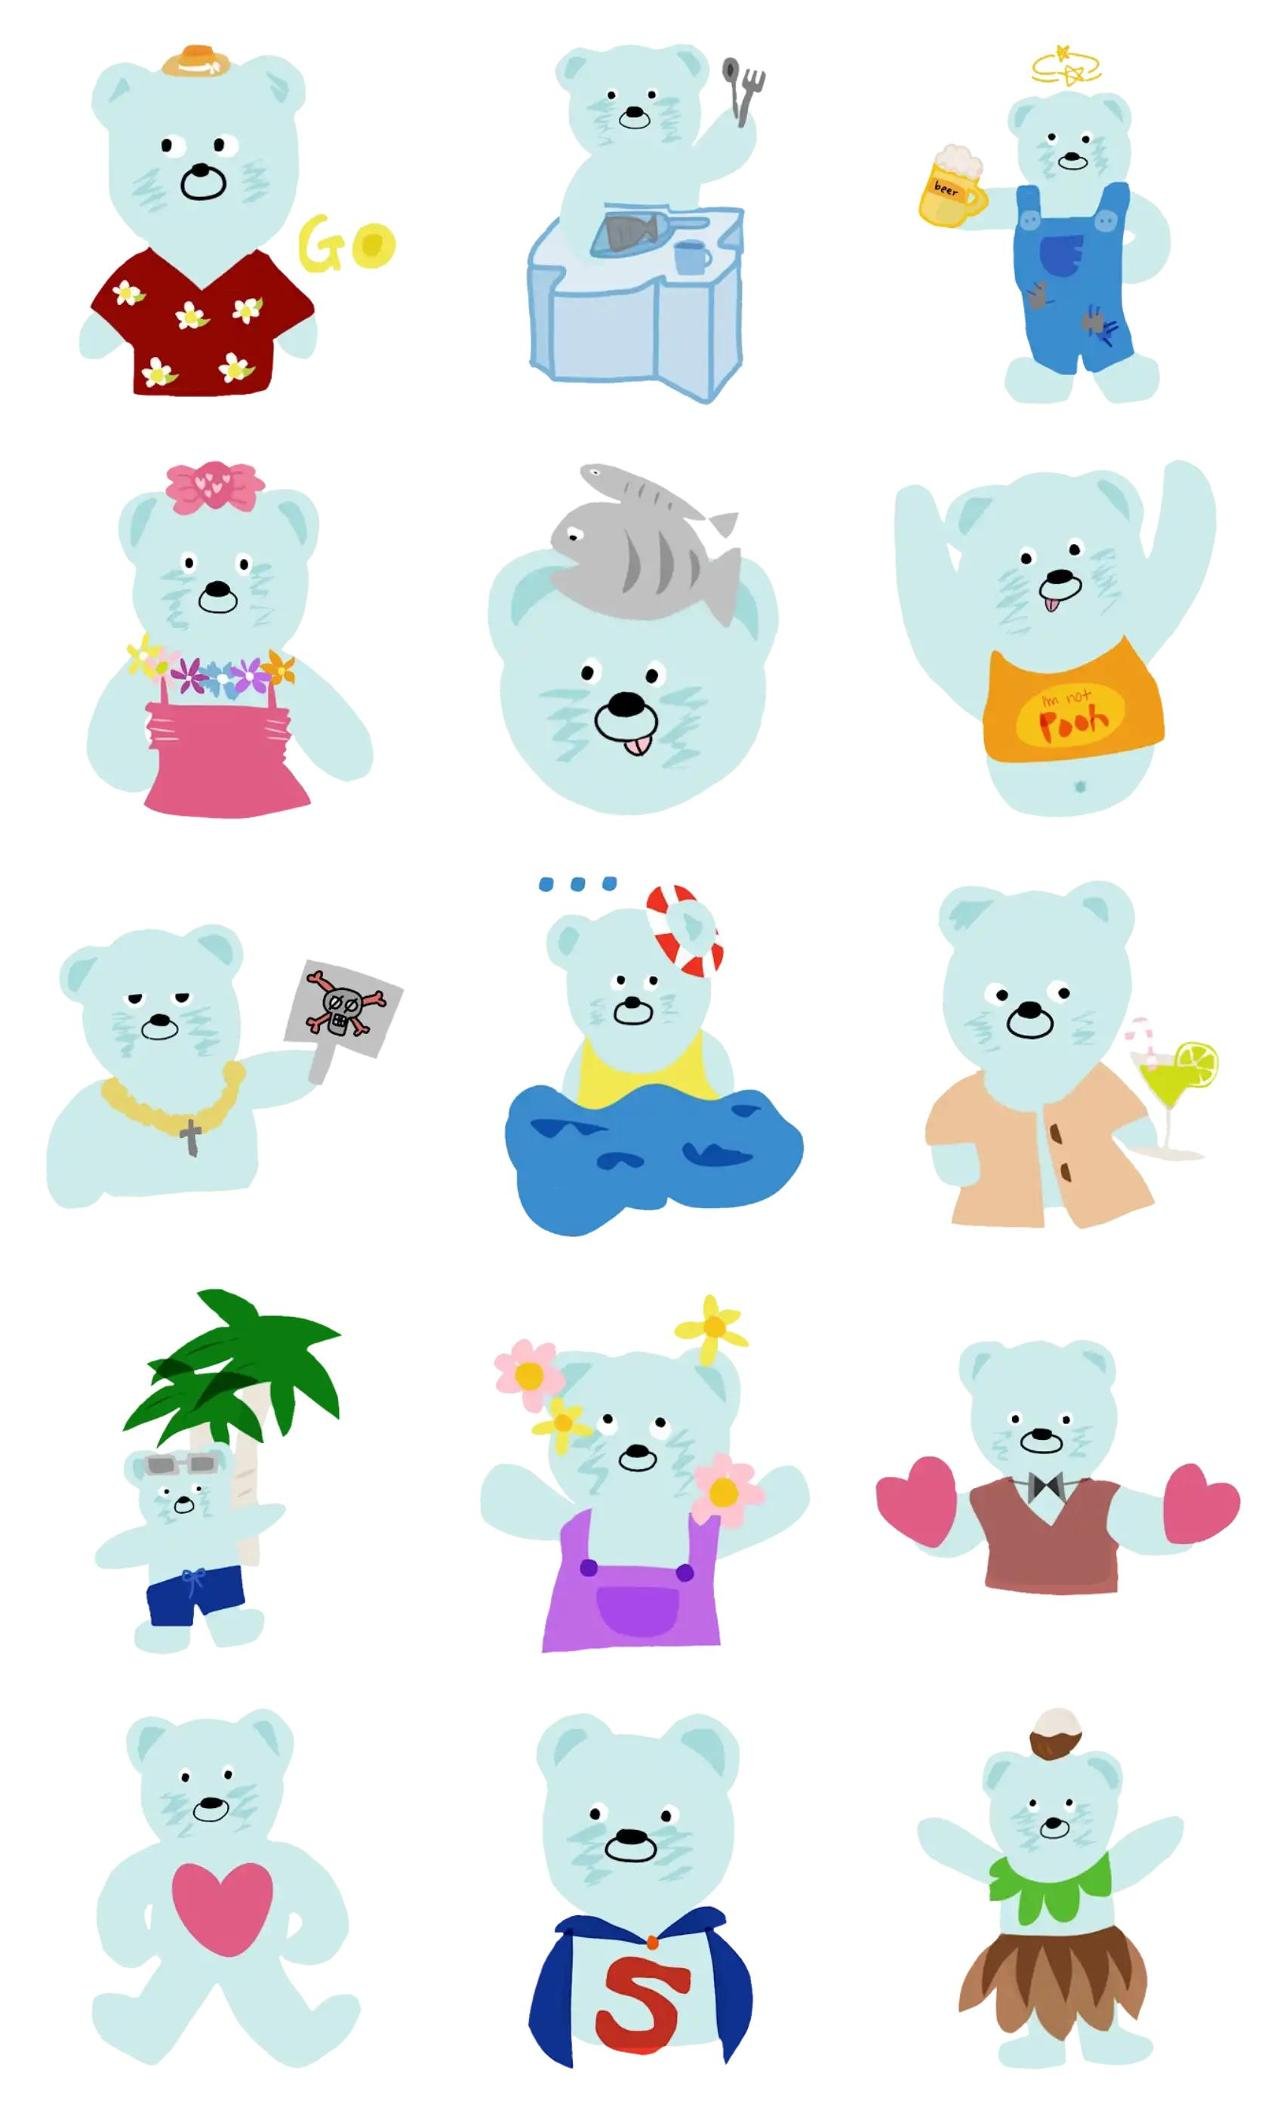 polar bear's life Animation/Cartoon,Animals sticker pack for Whatsapp, Telegram, Signal, and others chatting and message apps